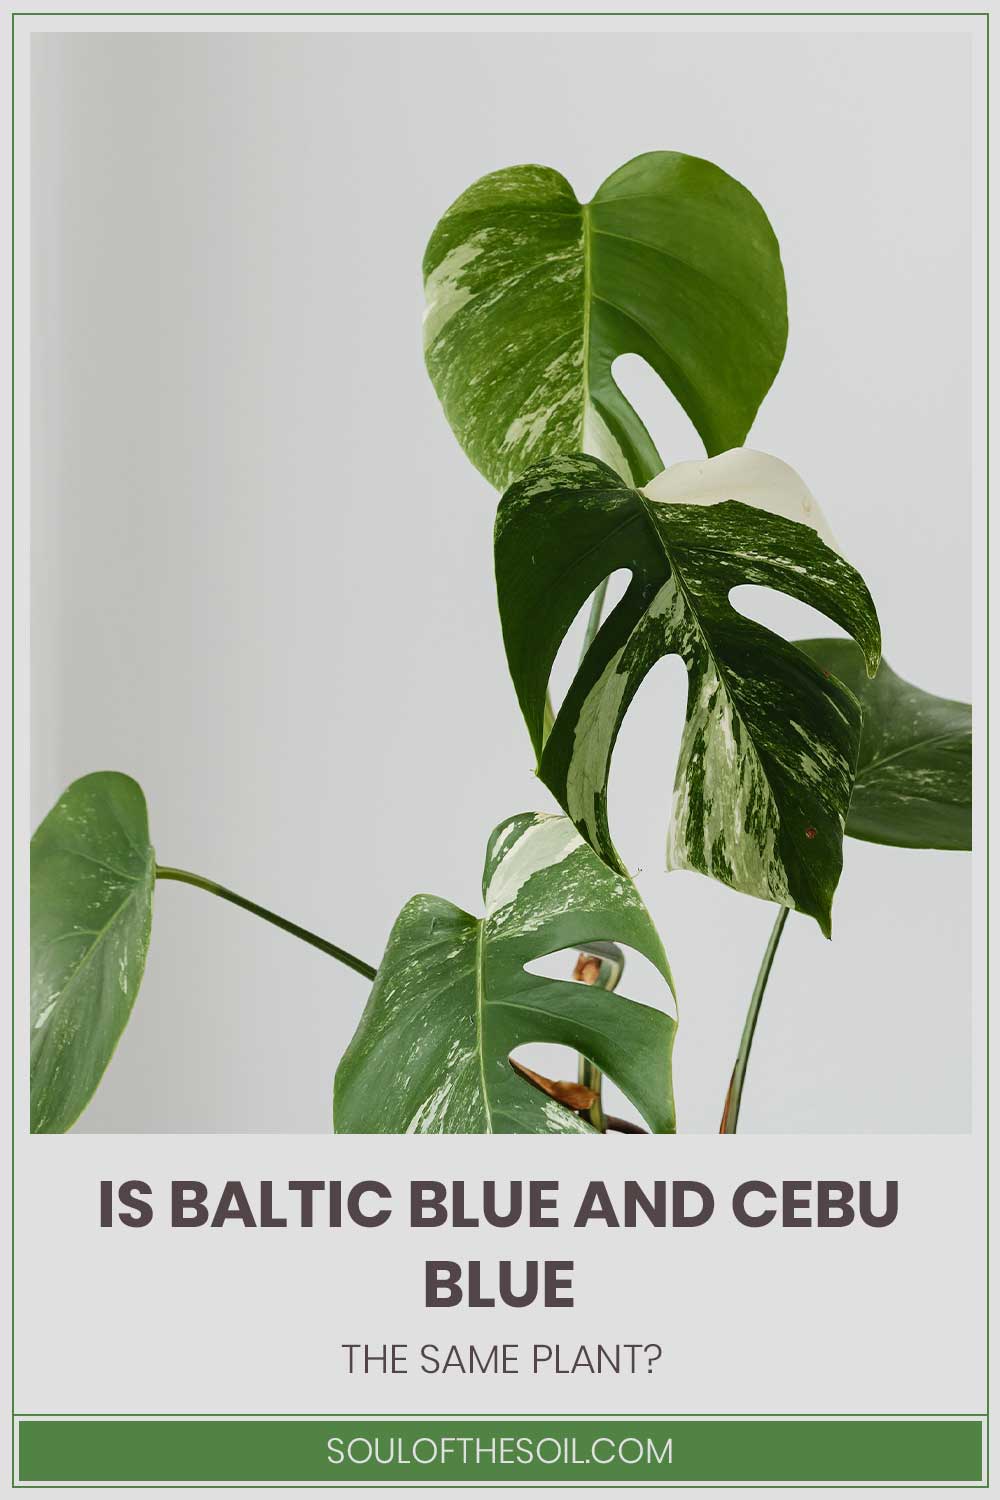 Is Baltic Blue And Cebu Blue The Same Plant?